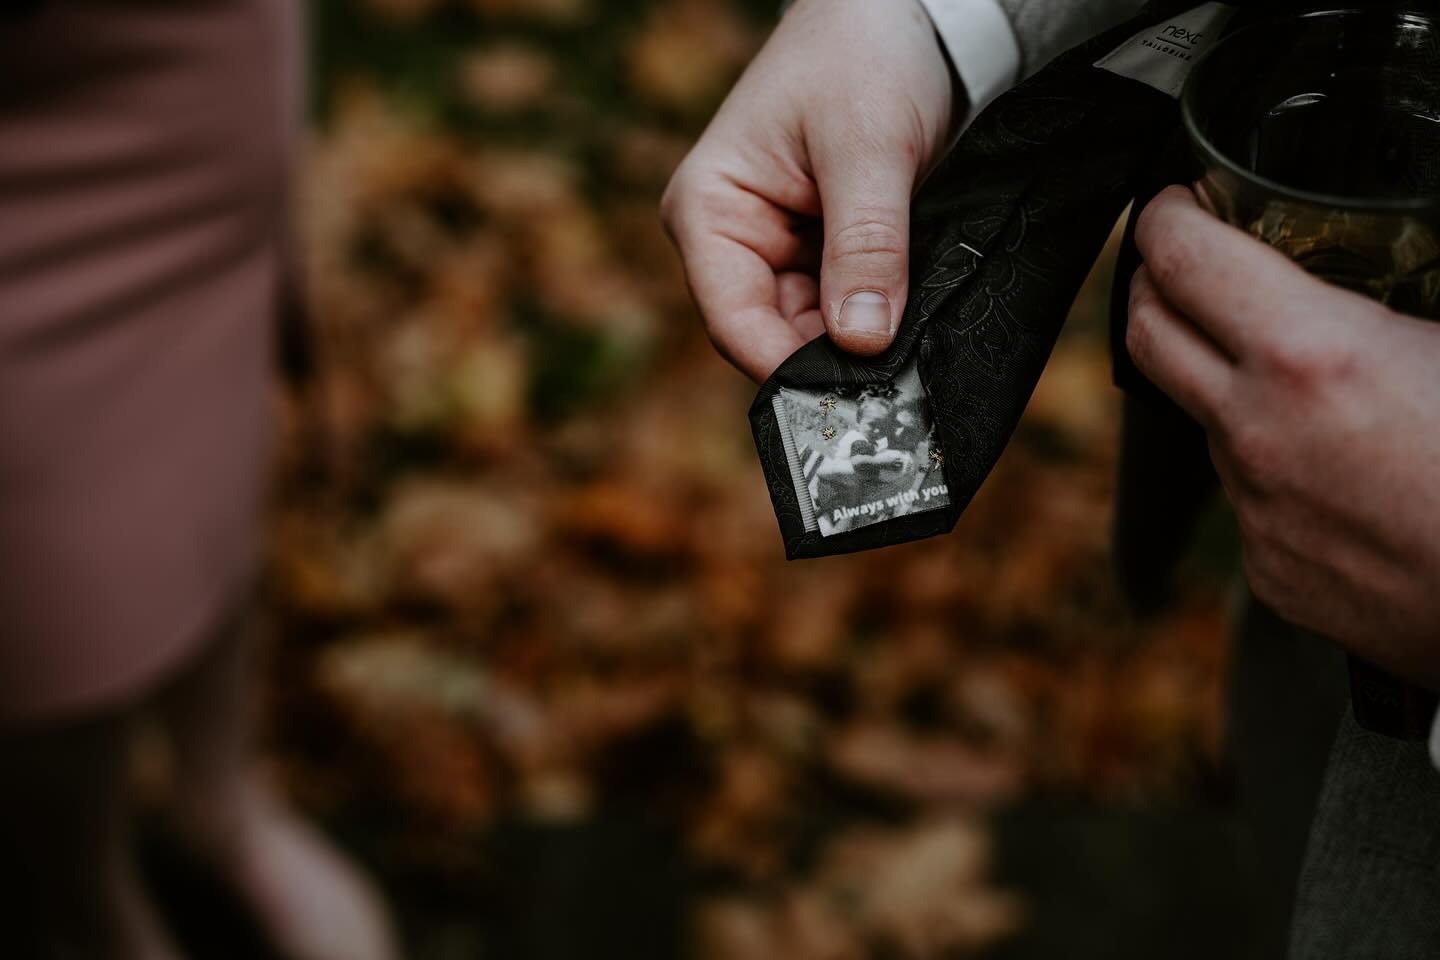 🤍

Personalised tie patches available to order
A beautiful gift for your father or groom to be on your wedding day. It could be a special image with your dad or your husband or a photograph of a lost loved one to be near them on a special day 🤍 

@